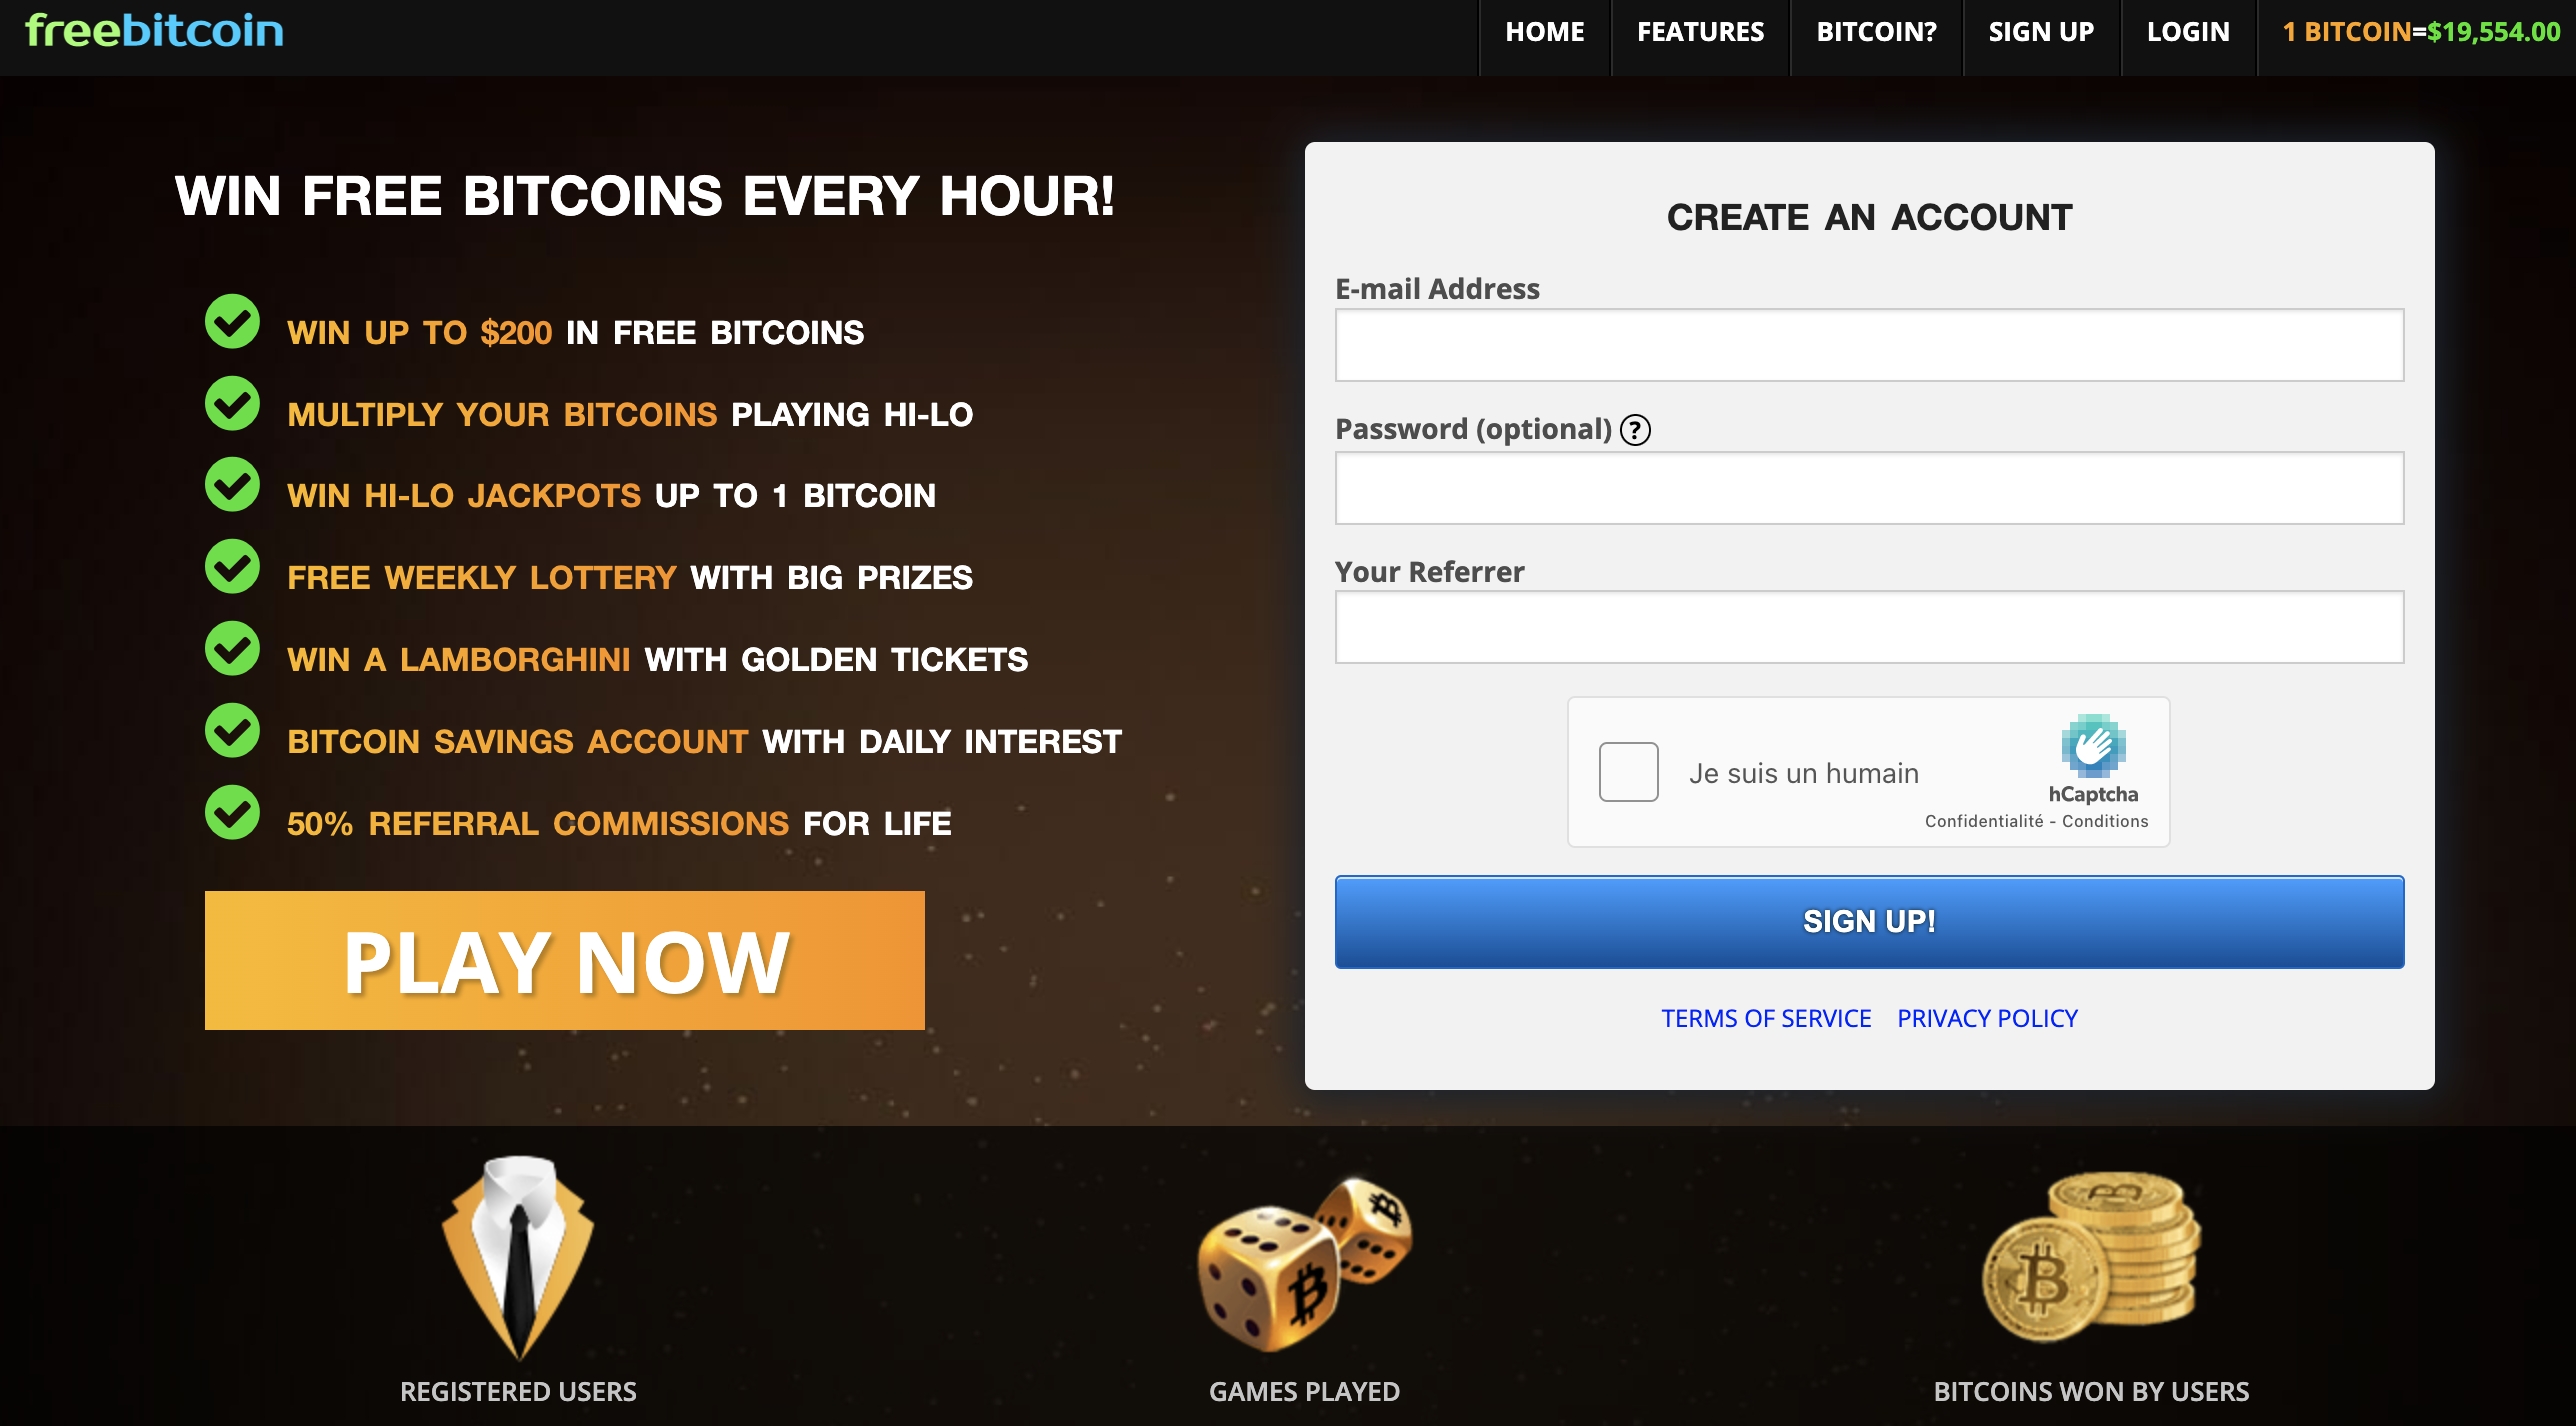 FreeBitcoin sign up page